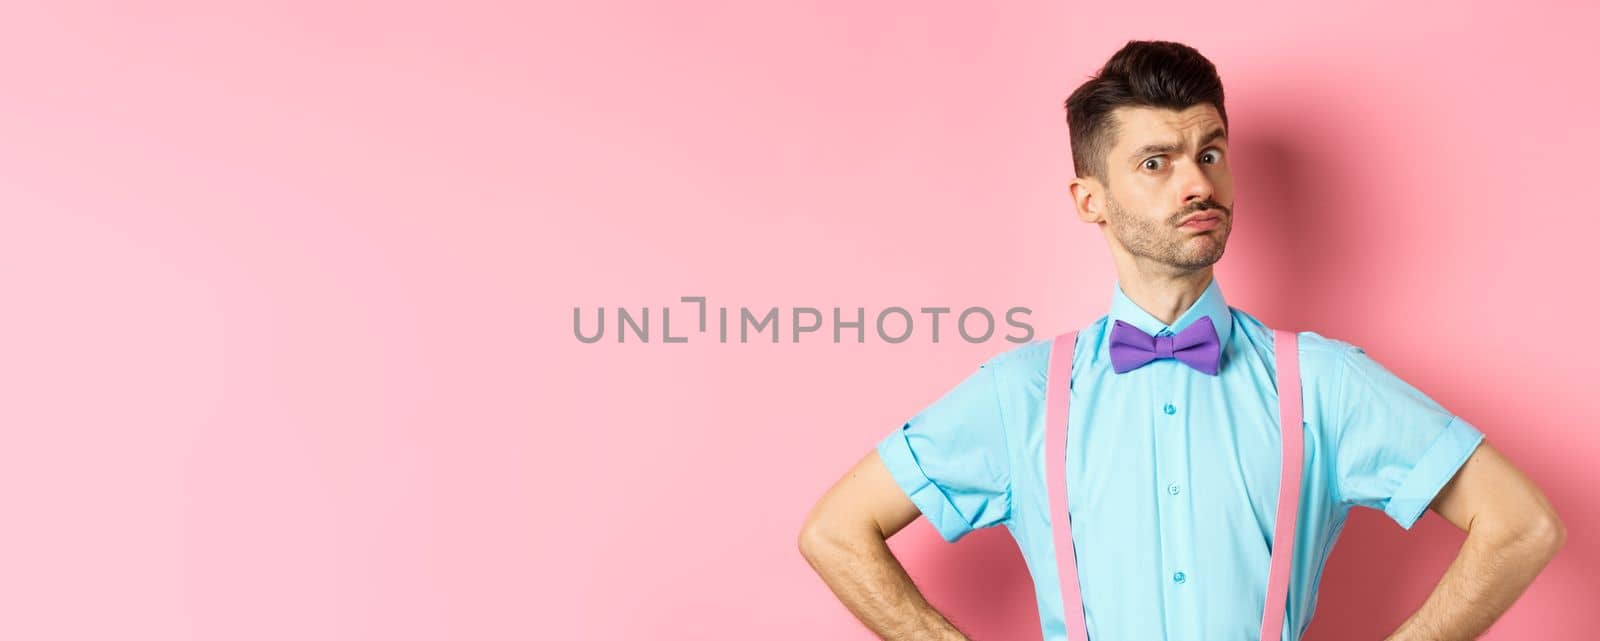 Image of young man with funny moustache and bow-tie standing in confident pose, staring with disbelief and doubts at camera, posing over pink background.